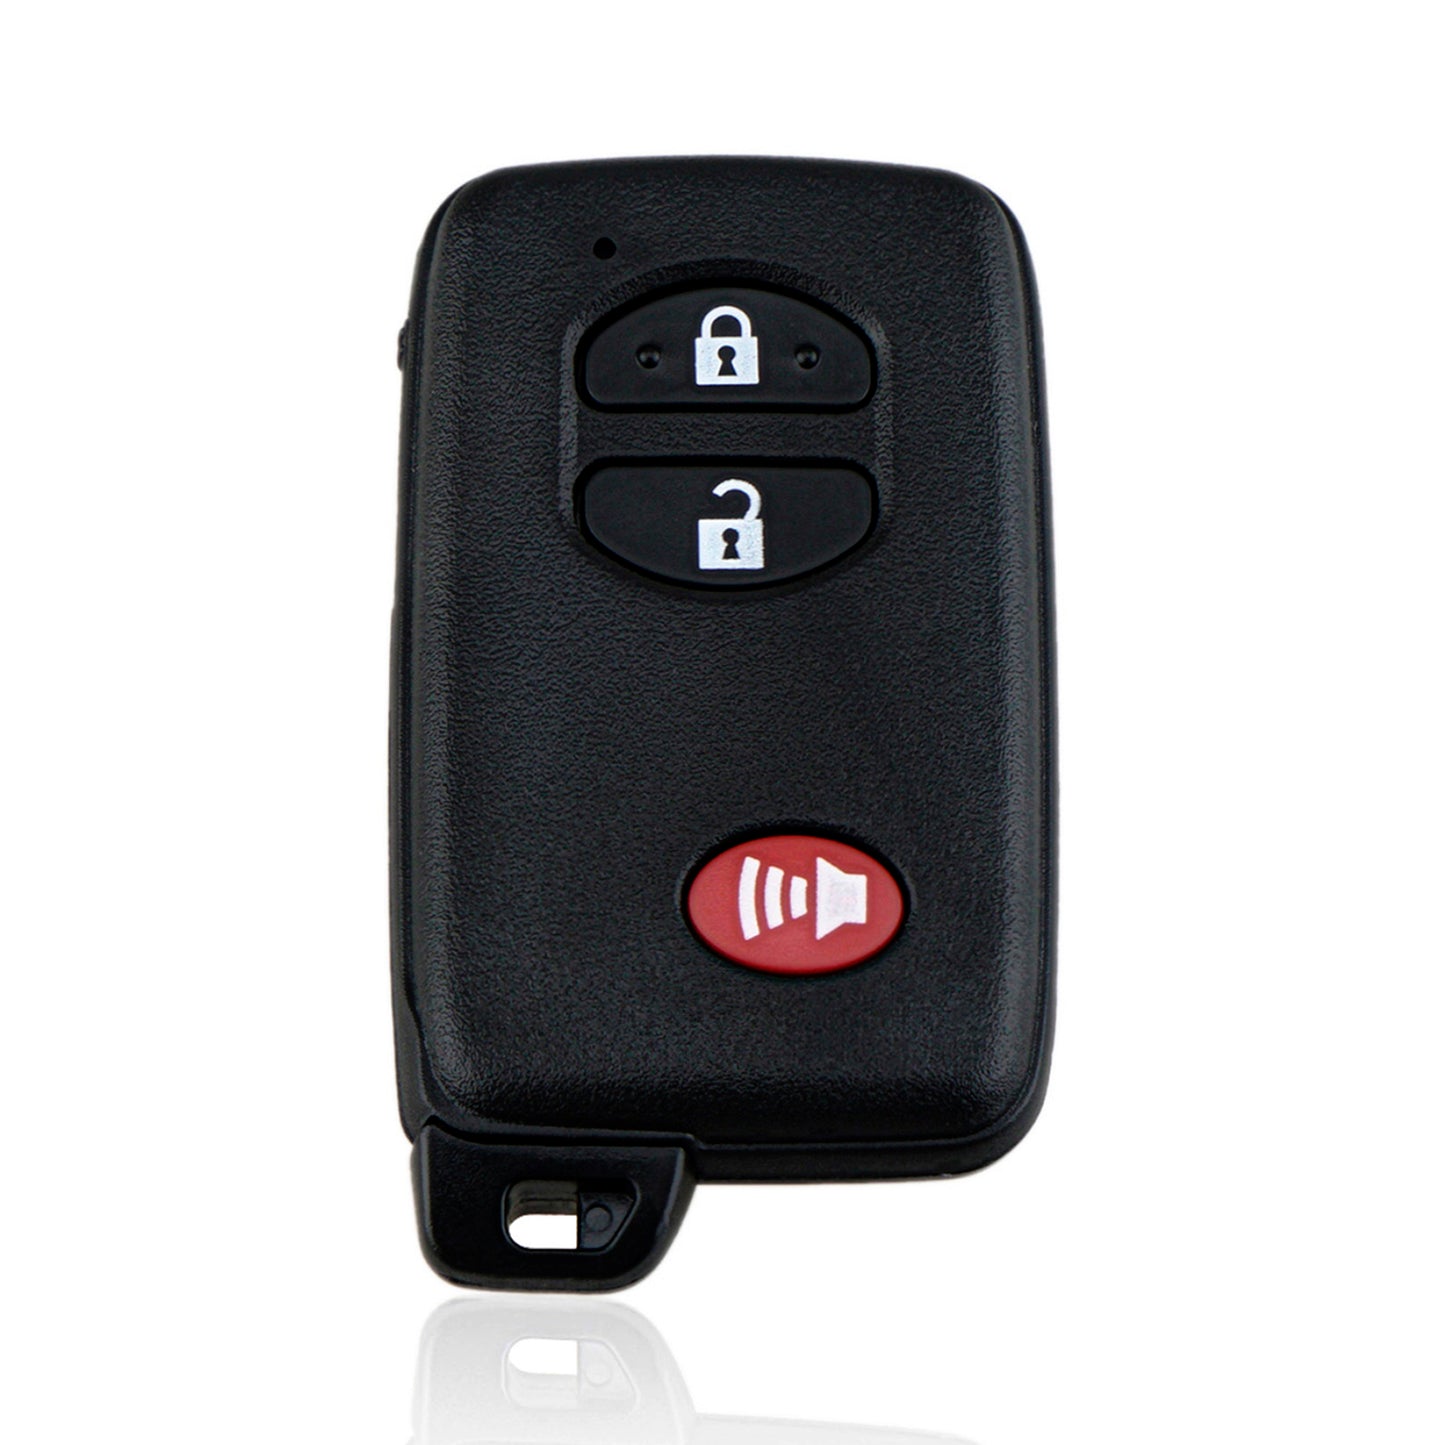 3 Buttons 314.3MHz Smart Keyless Entry Proximity Remote Fob Car Key For 2010-2019 Toyota Venza Prius C V 4Runner FCC ID HYQ14ACX SKU : H524